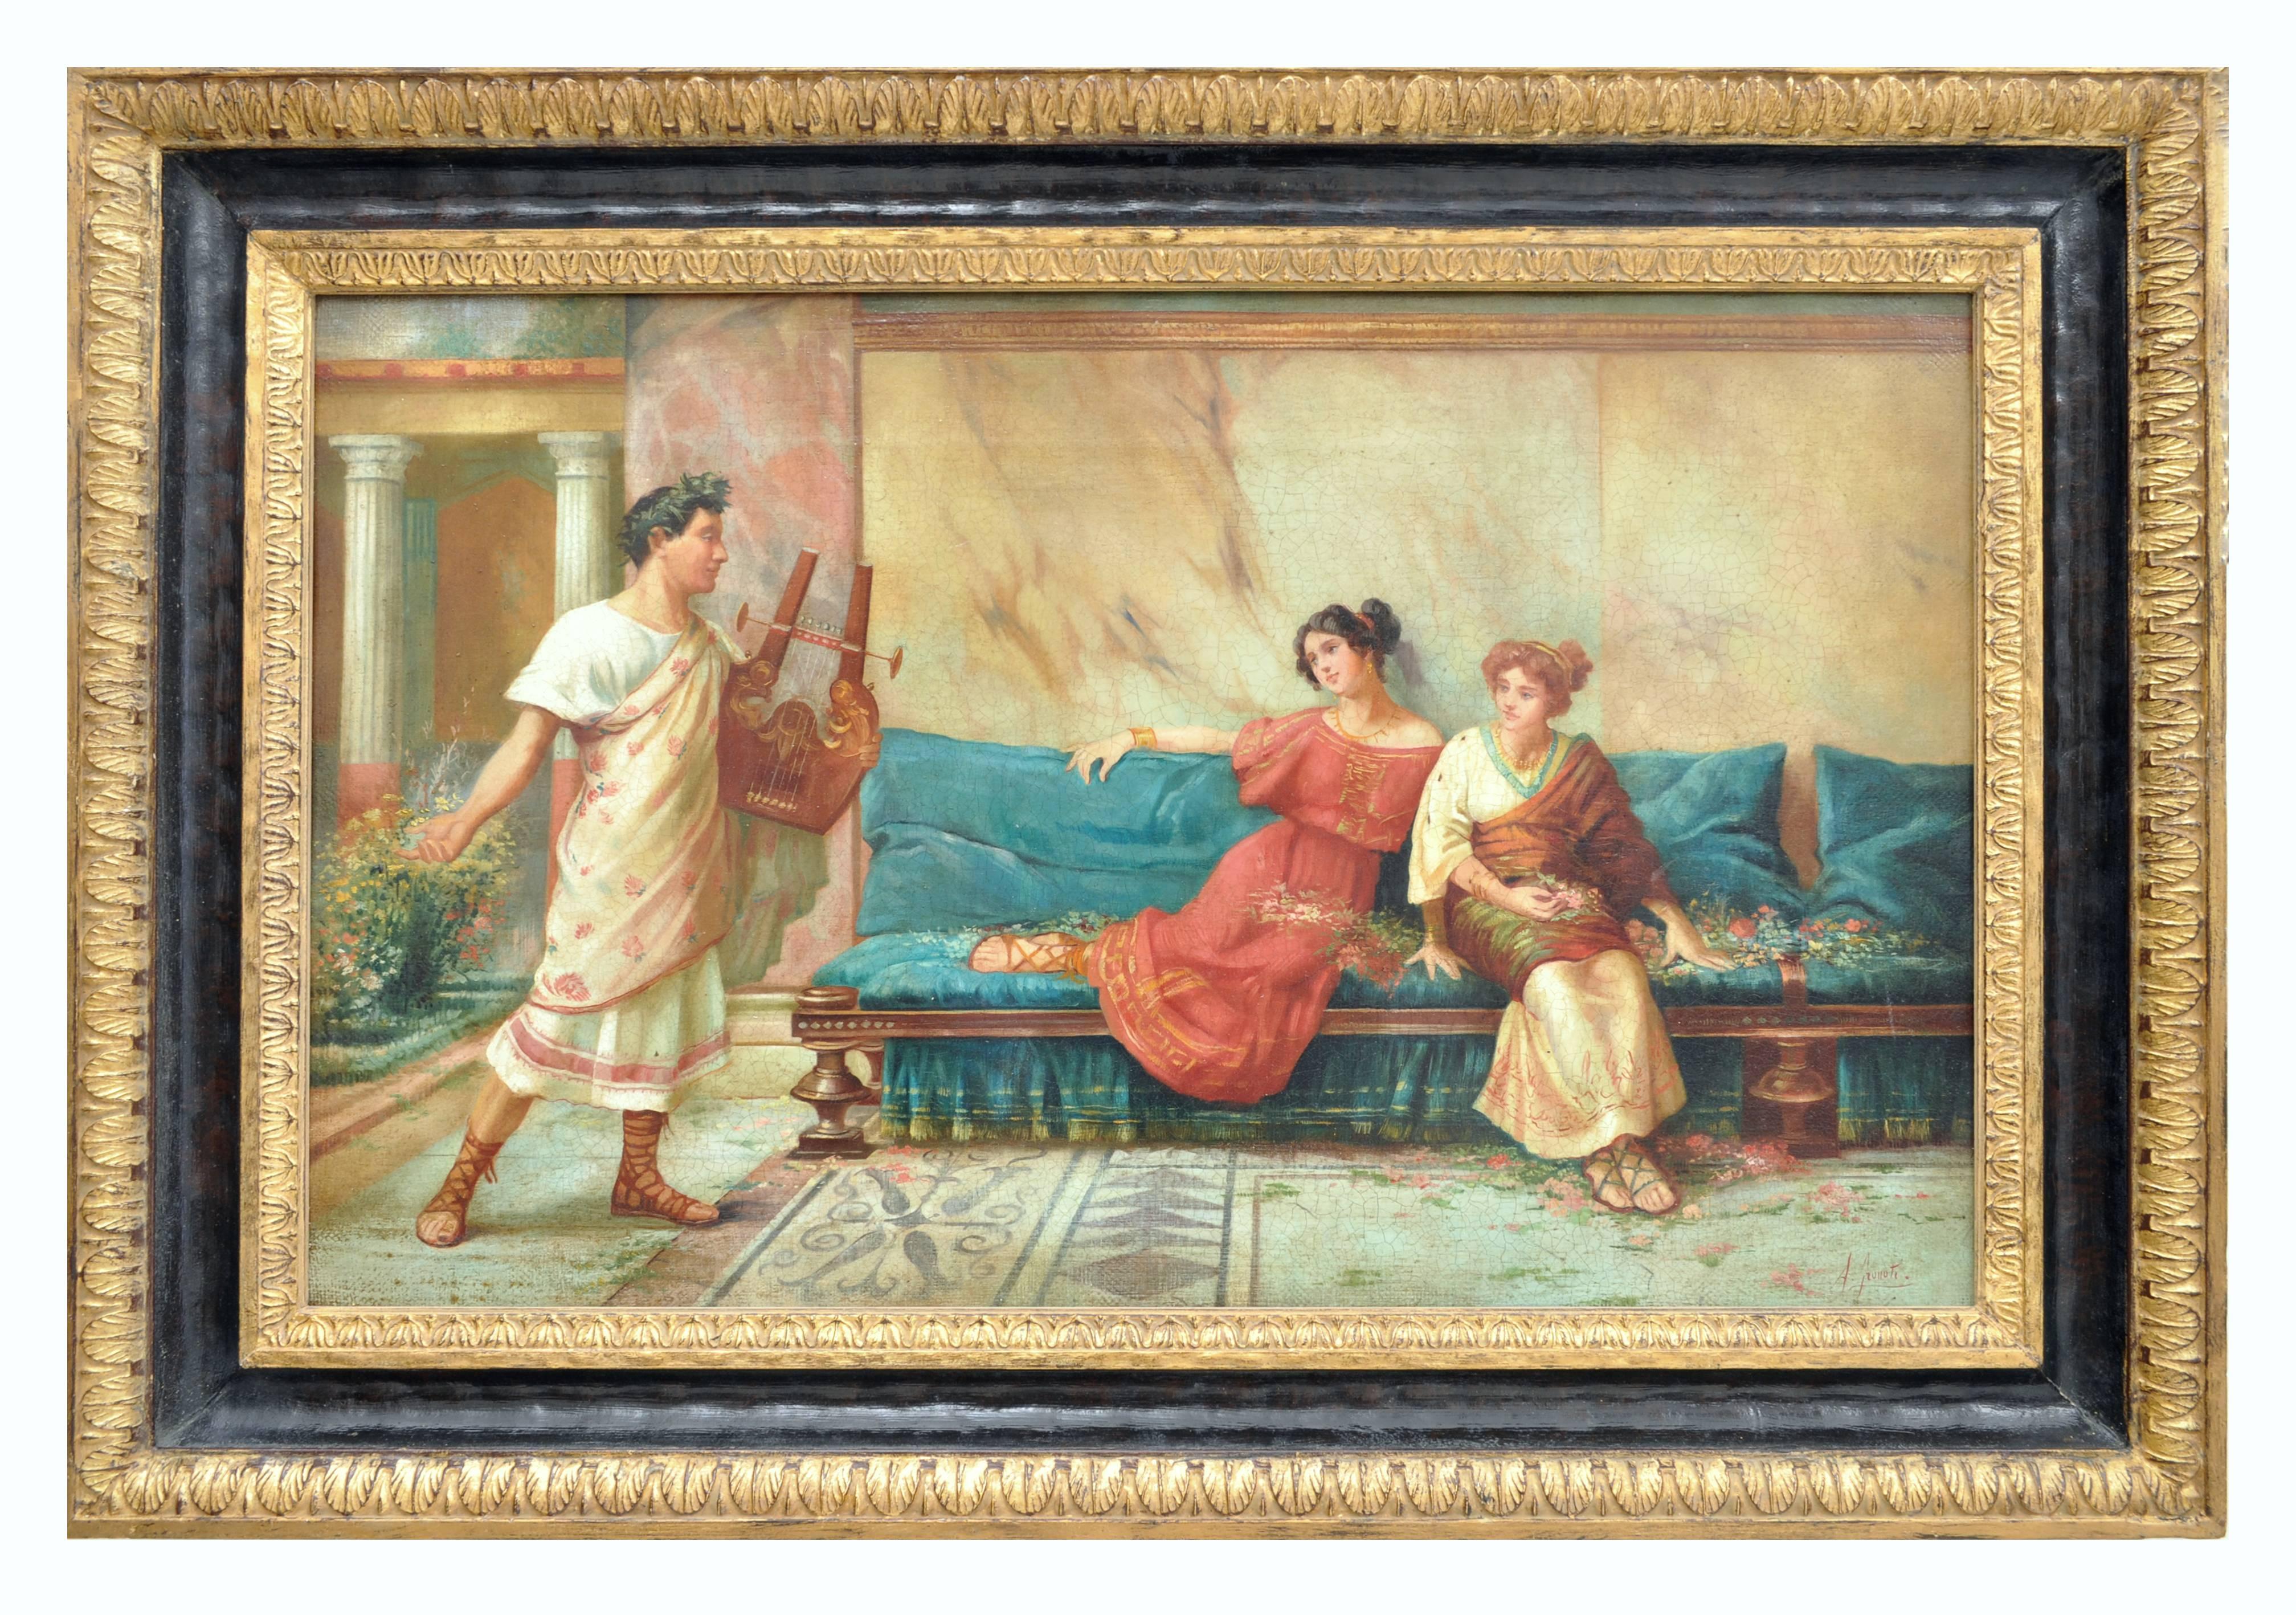 Pompeian Scene - Angelo Granati Italia 2011 - Oil on canvas mis. cm. 50 x 80. 
Gold leaf gilded wooden frame ext. mis. cm. 70 x 100.

In this painting, Maestro Angelo Granati drew inspiration from the paintings of Maestro John William Godward, who